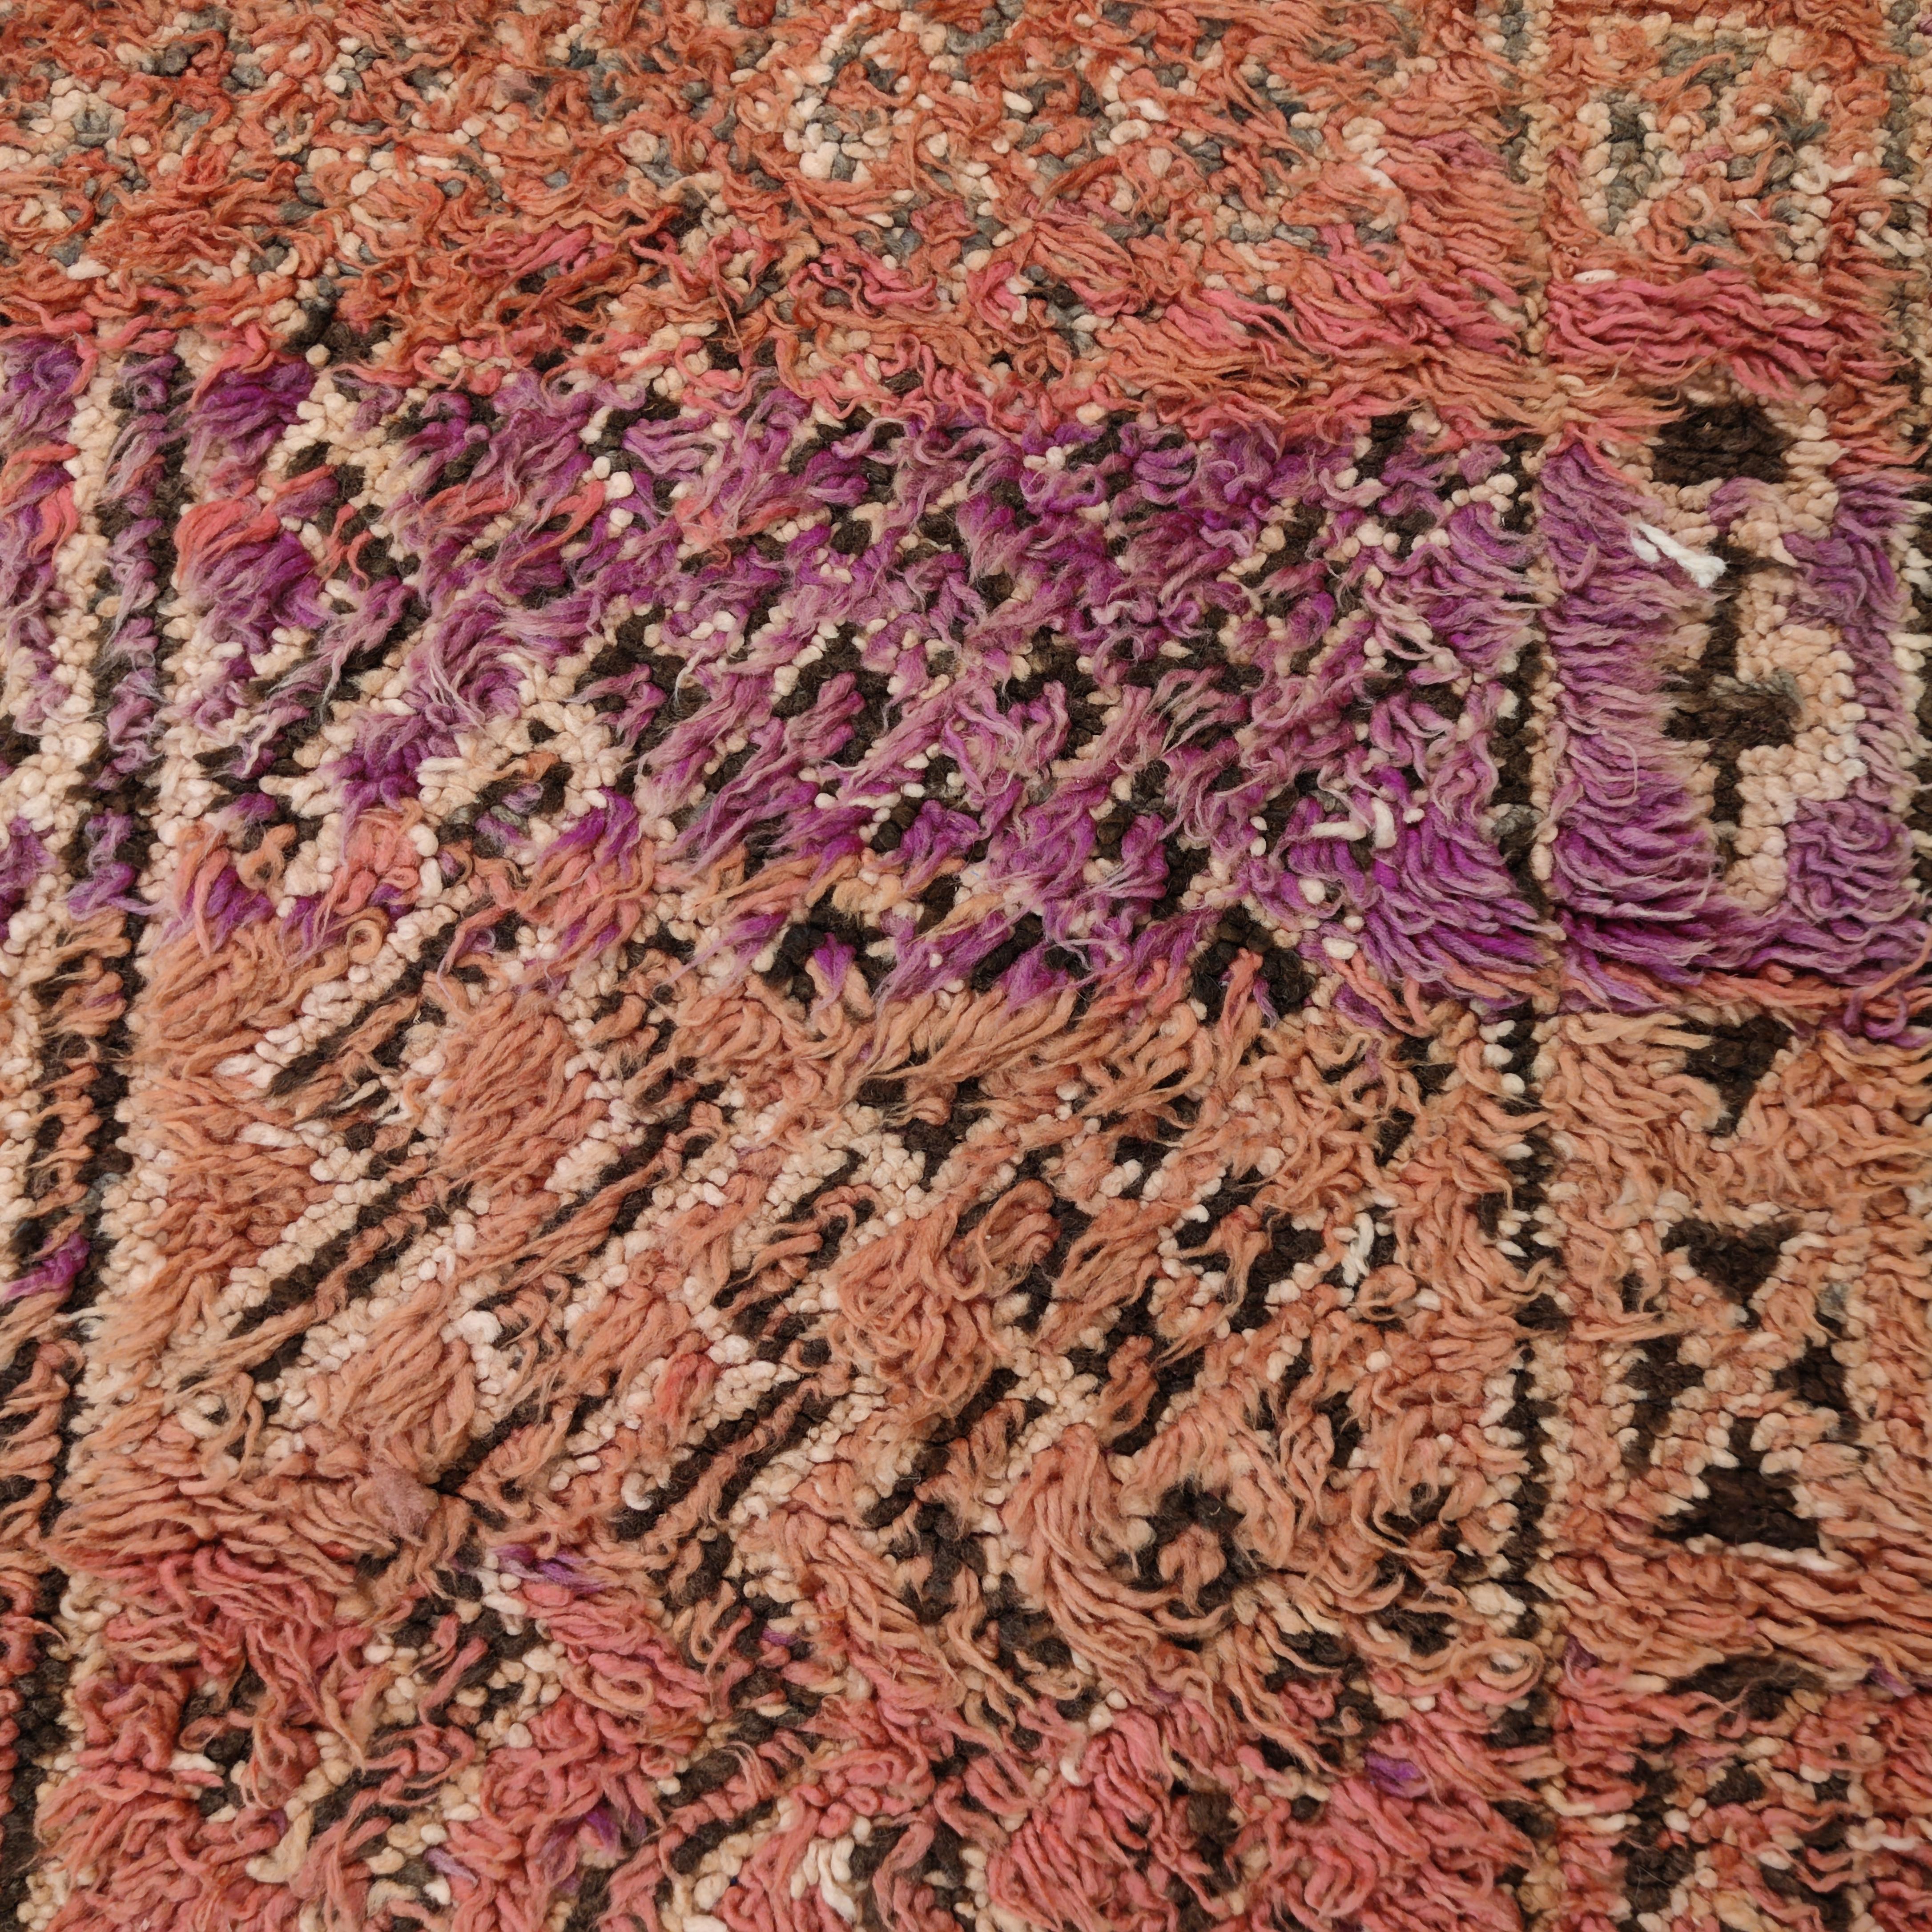 The rugs of the Beni Mguild tribe, located in the Moroccan Middle Atlas mountains, are woven with lanolin-rich wool and constructed in a particularly sturdy fashion. Here we see a signature Beni Mguild pattern and texture, the design being partially